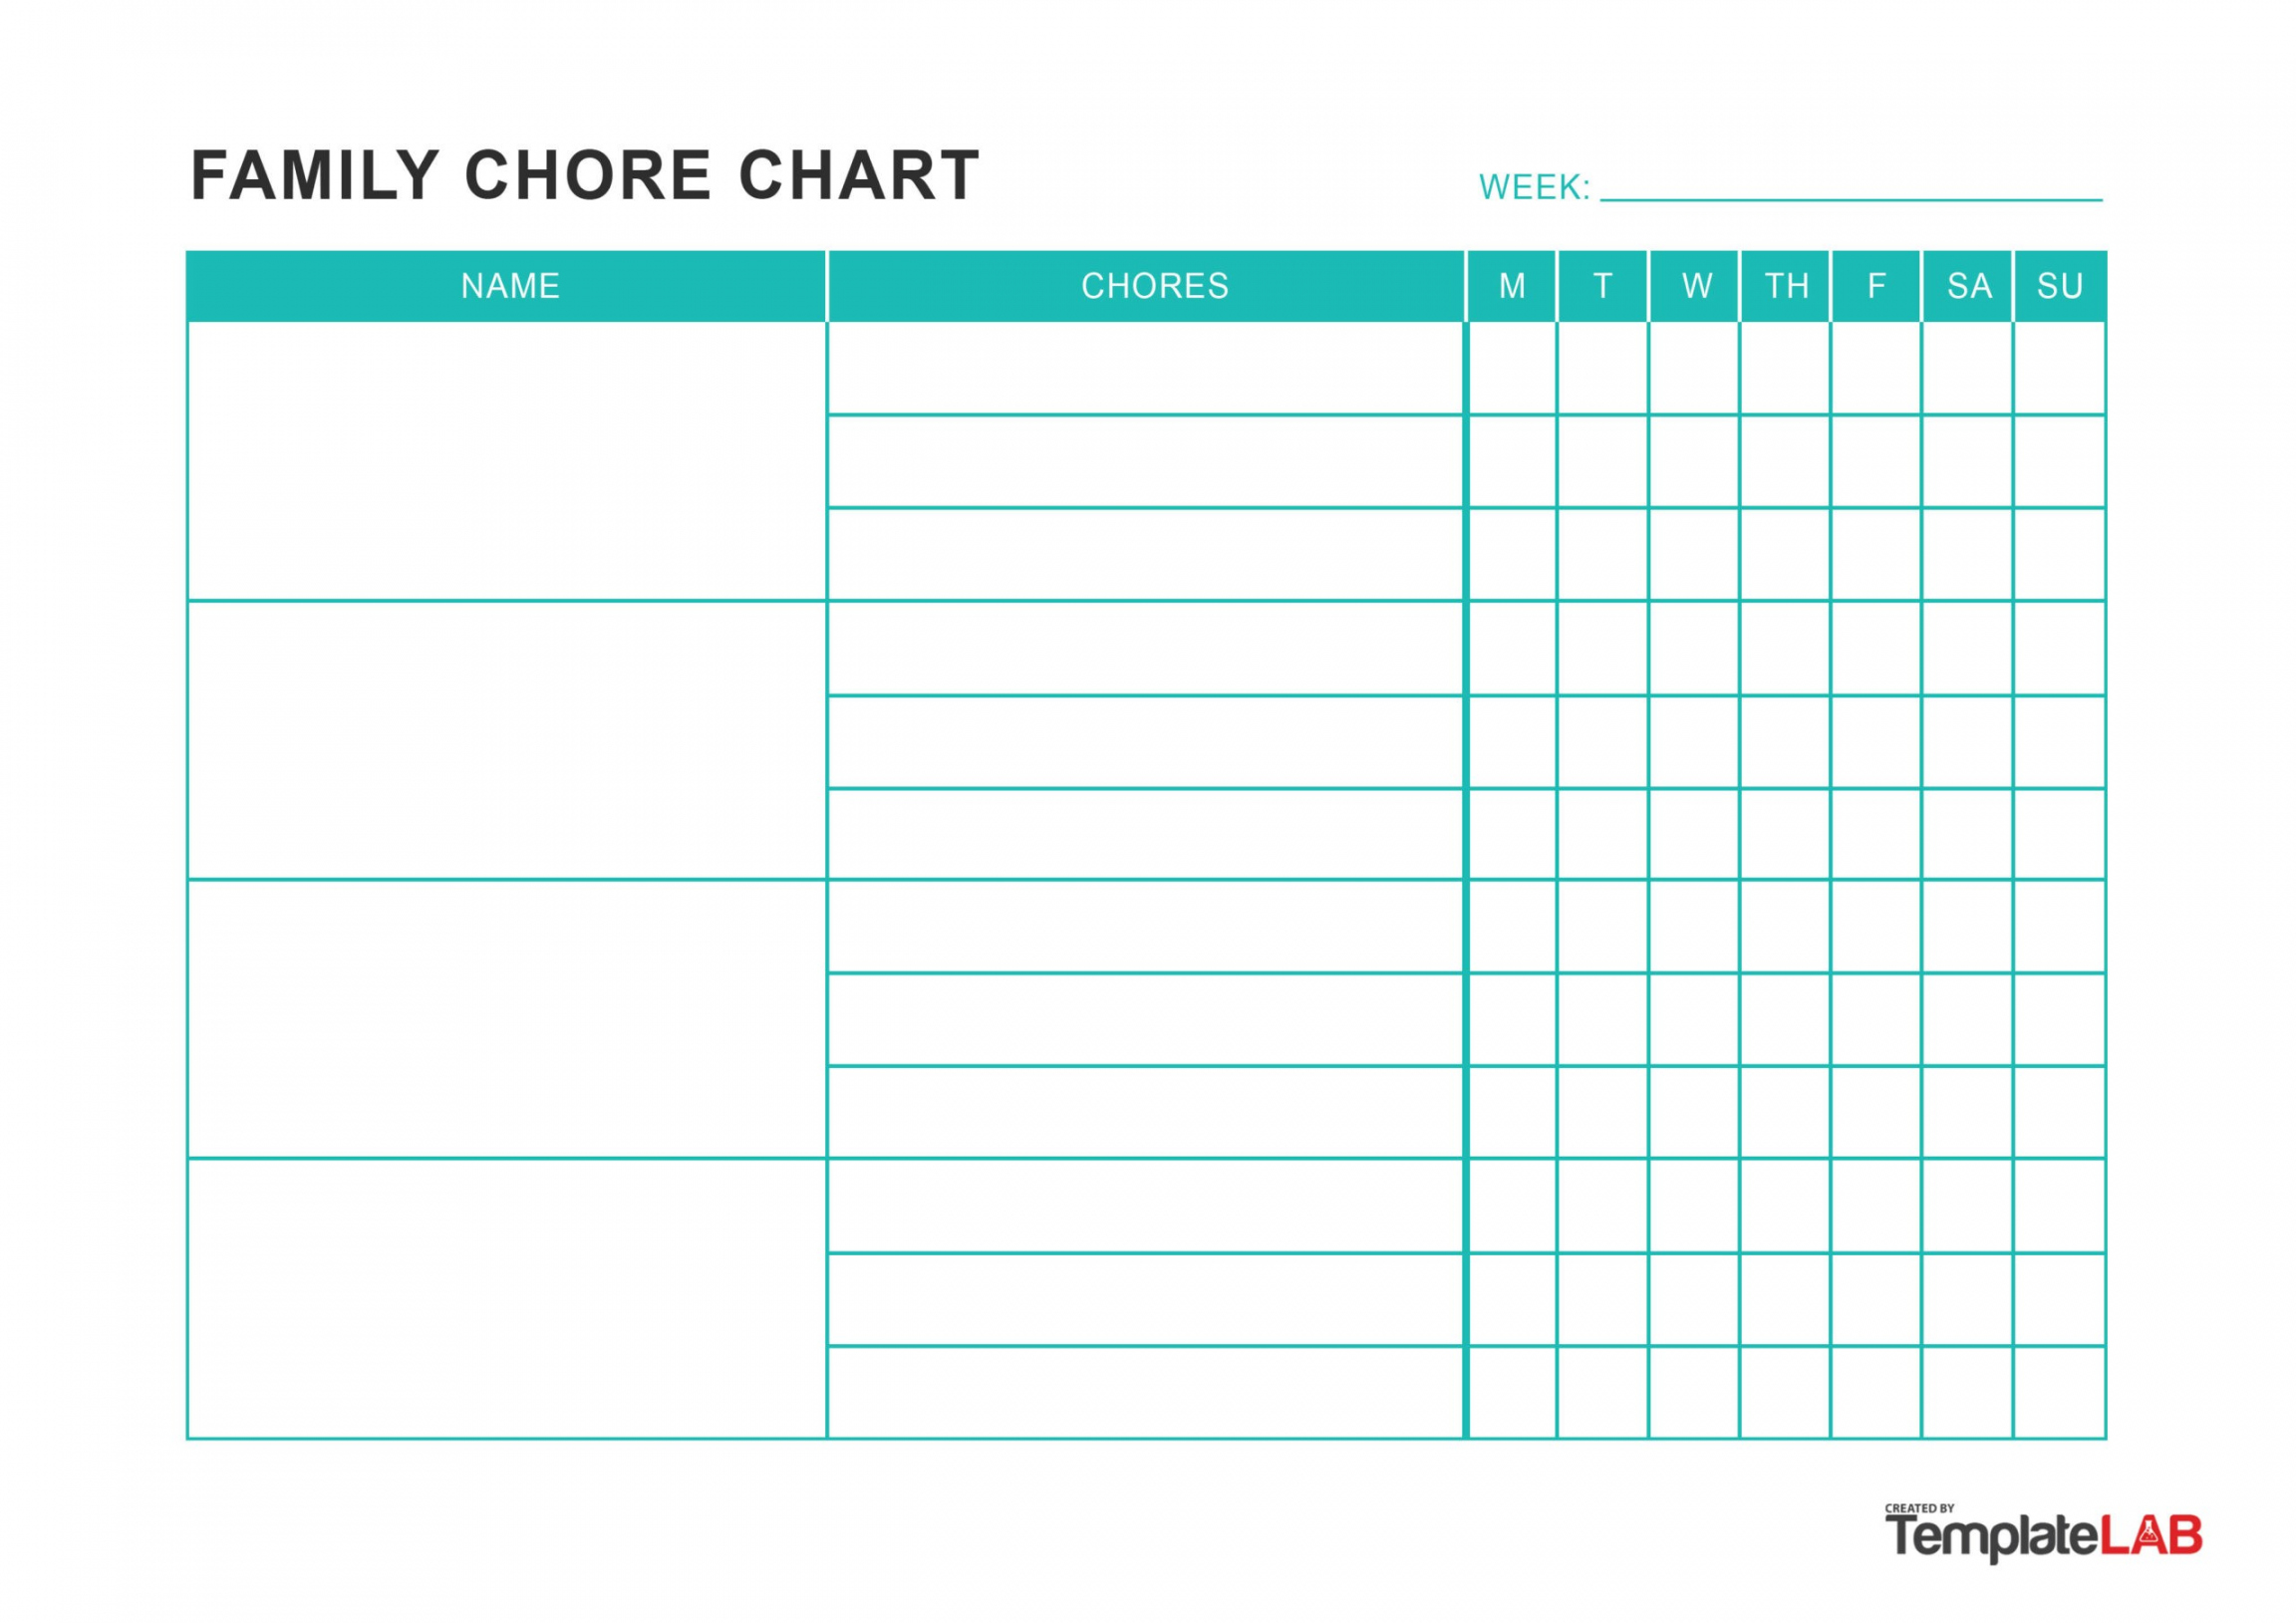 FREE Chore Chart Templates for Kids ᐅ TemplateLab - FREE Printables - Family Chore Chart Printable Free